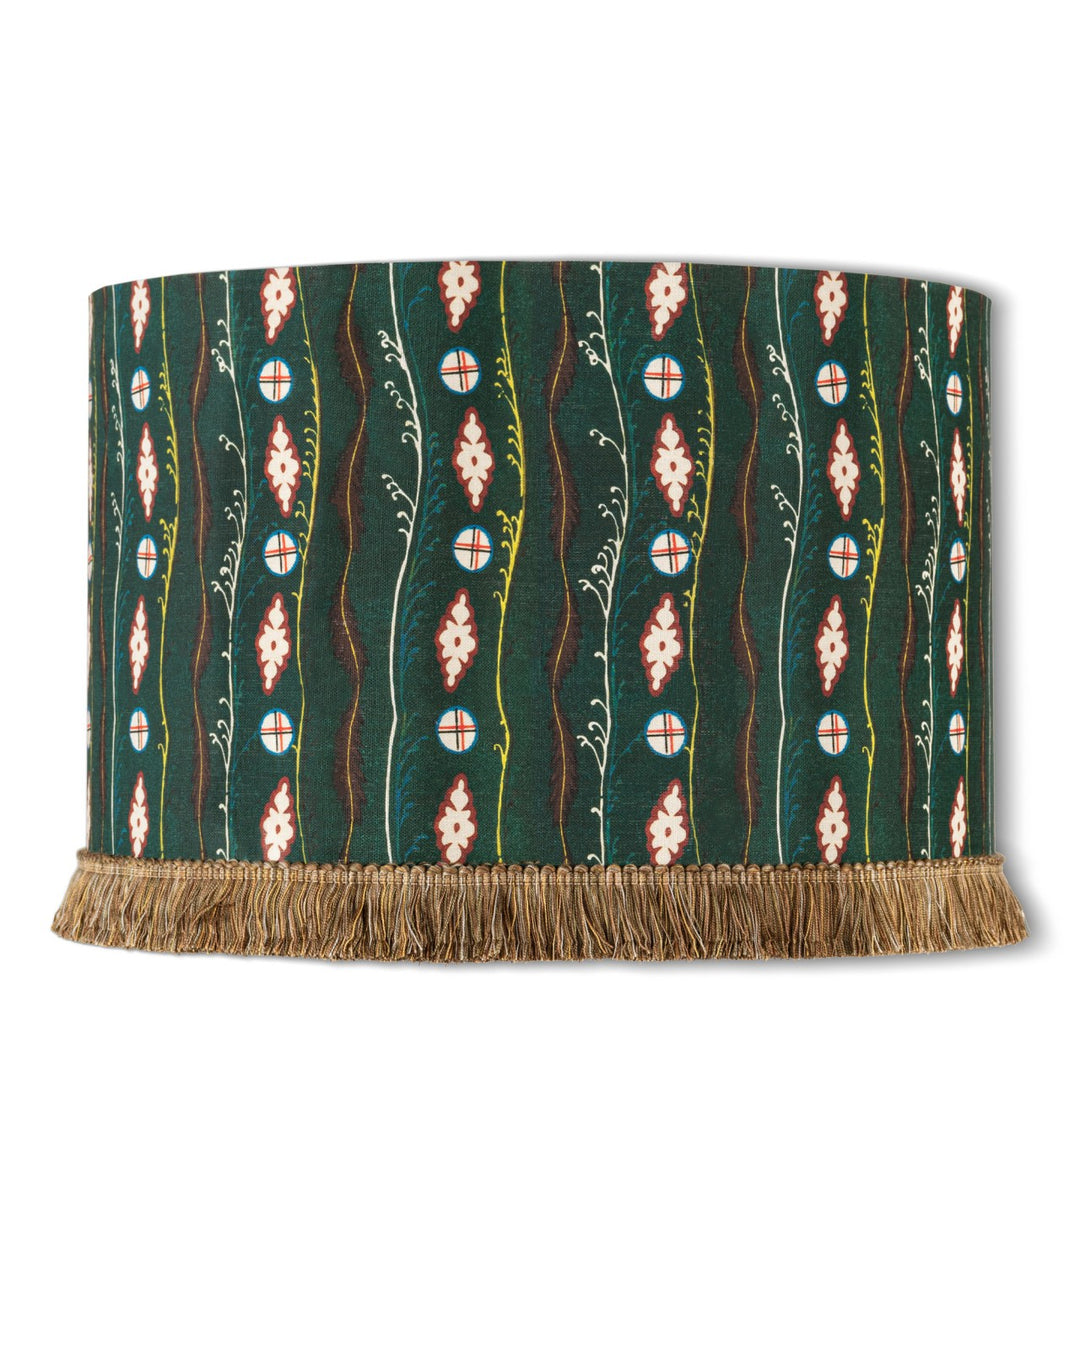 mind-the-gap-tyrol-collection-printed-linen-standard-lam-lampshade-table-lamp-tyrolean-pattern-fringed-edge-lampshade-green-printed-blockprint-style-shade-diamonds-alpine-chalet-decor